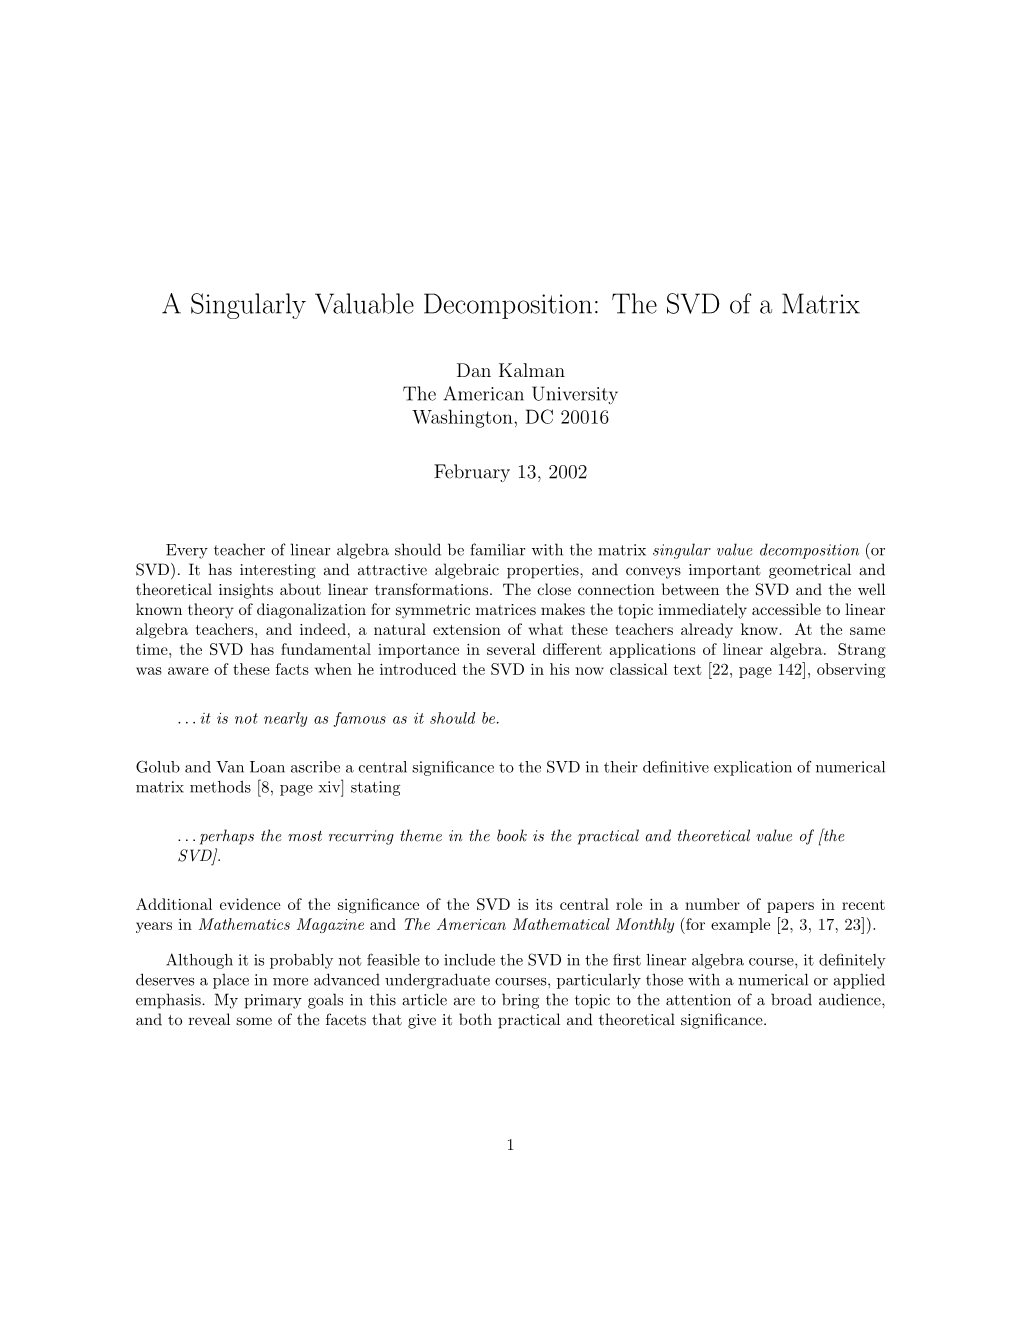 A Singularly Valuable Decomposition: the SVD of a Matrix